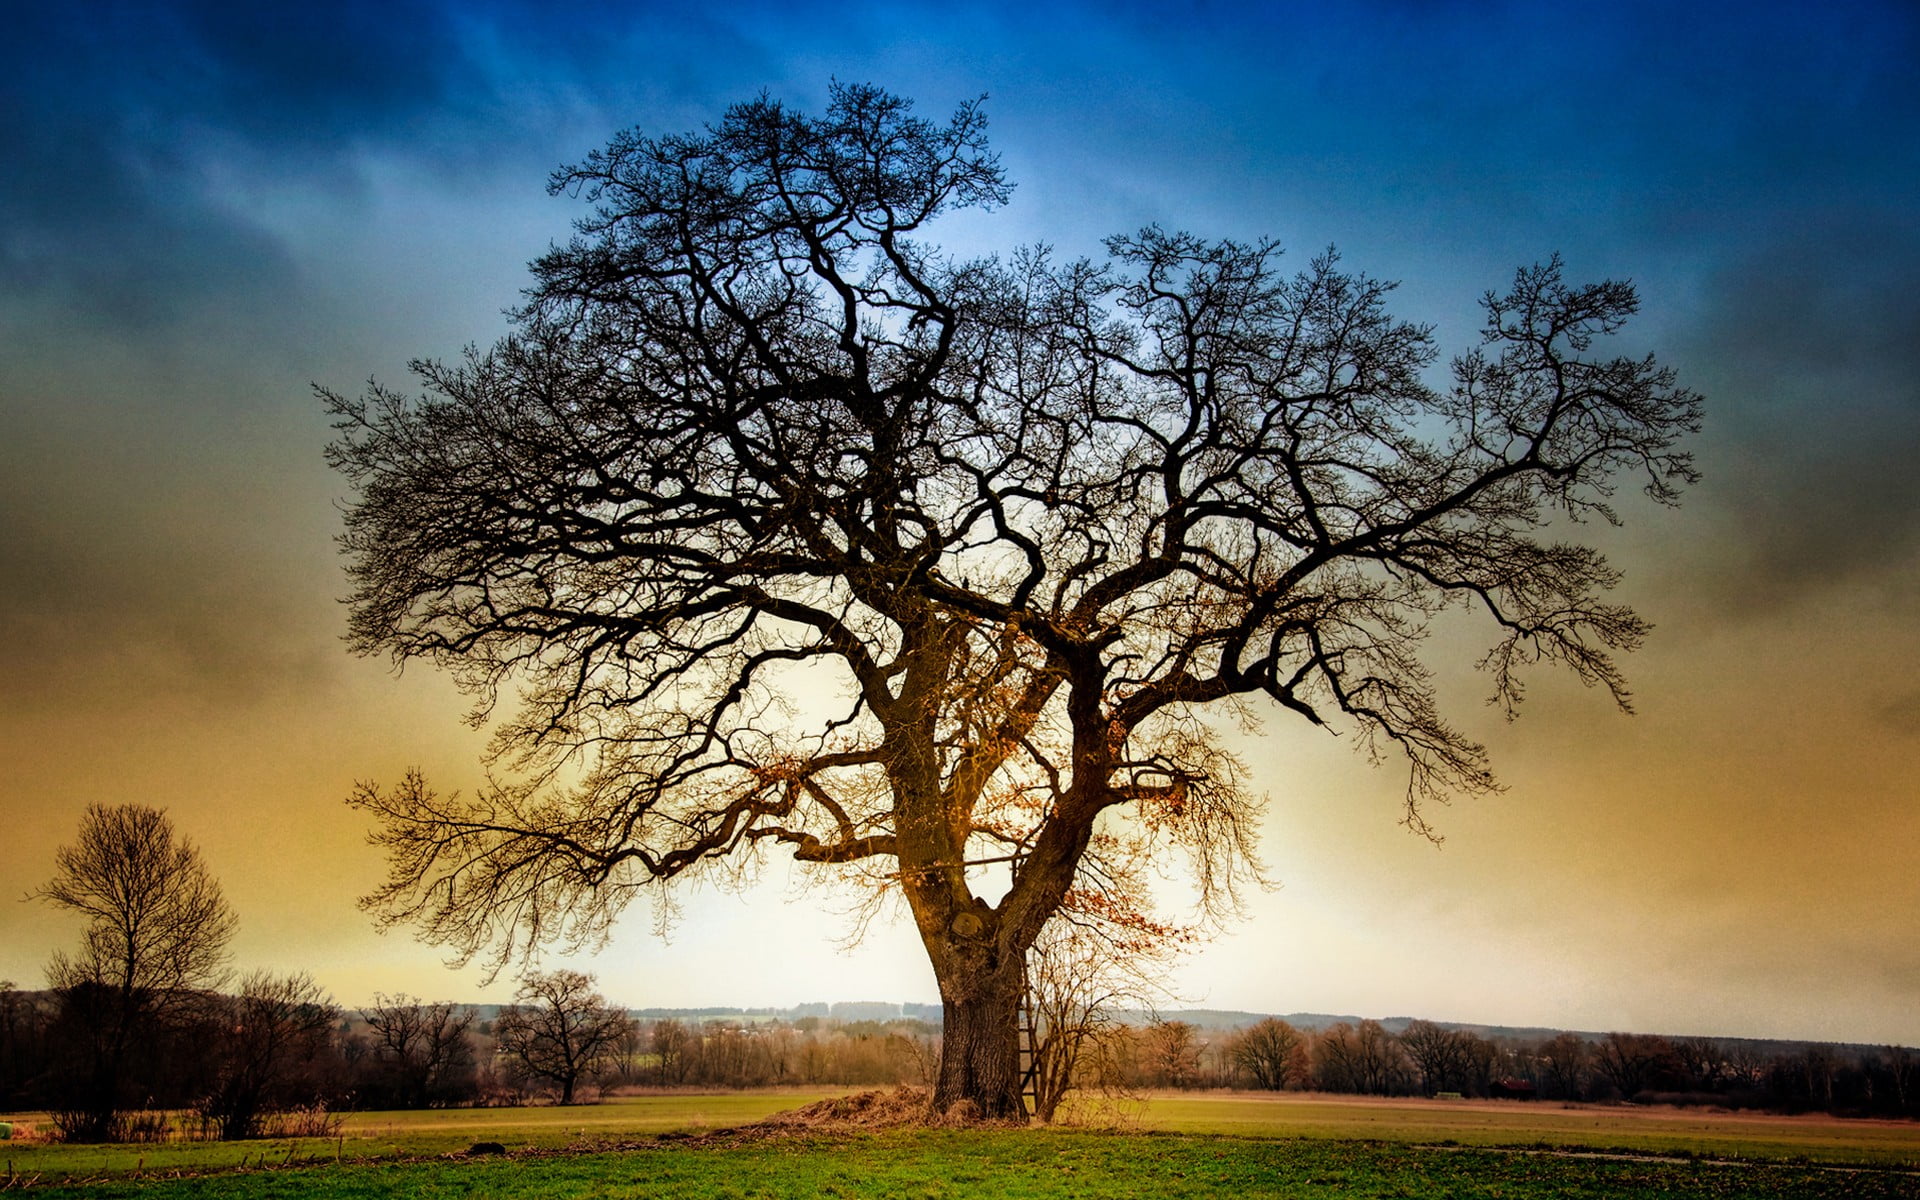 brown tree, nature, sunset, trees, HDR